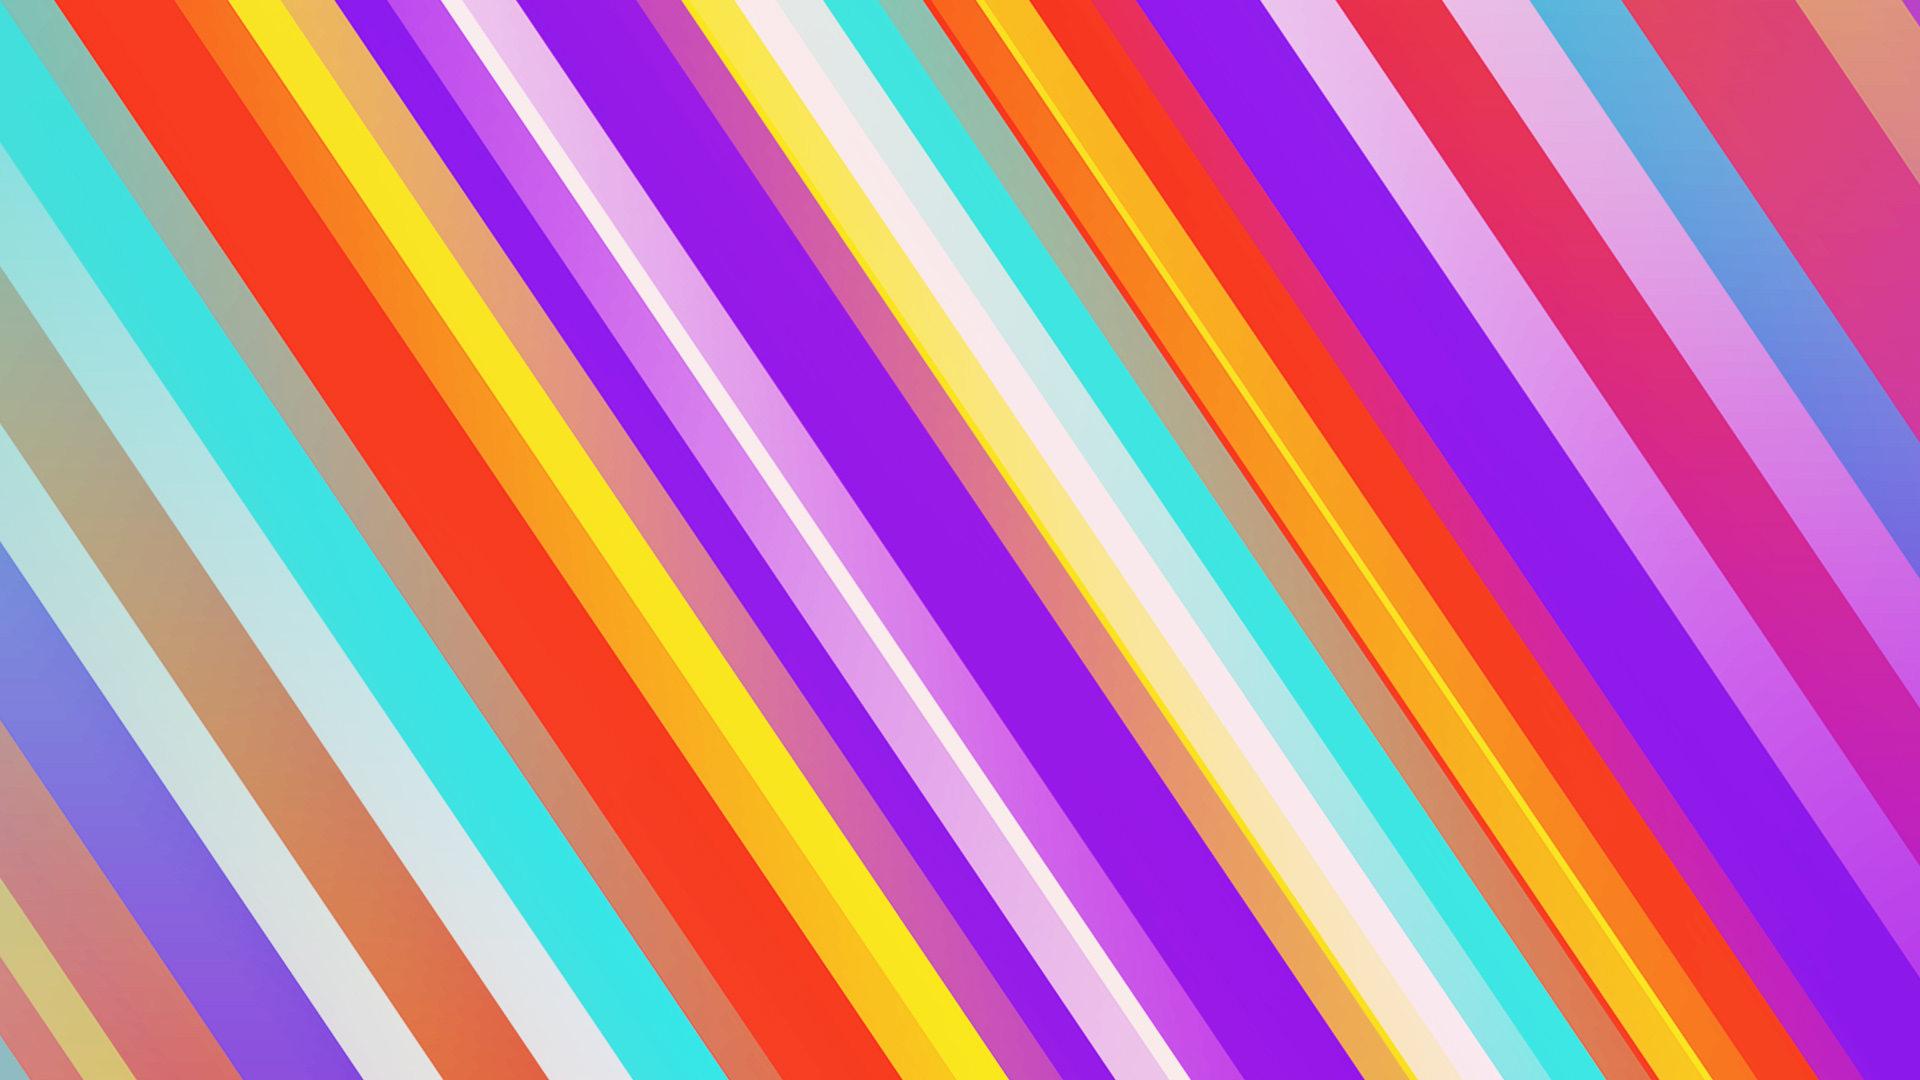 Abstract Colorful Digital Art Geometry Lines Stripes 1920x1080